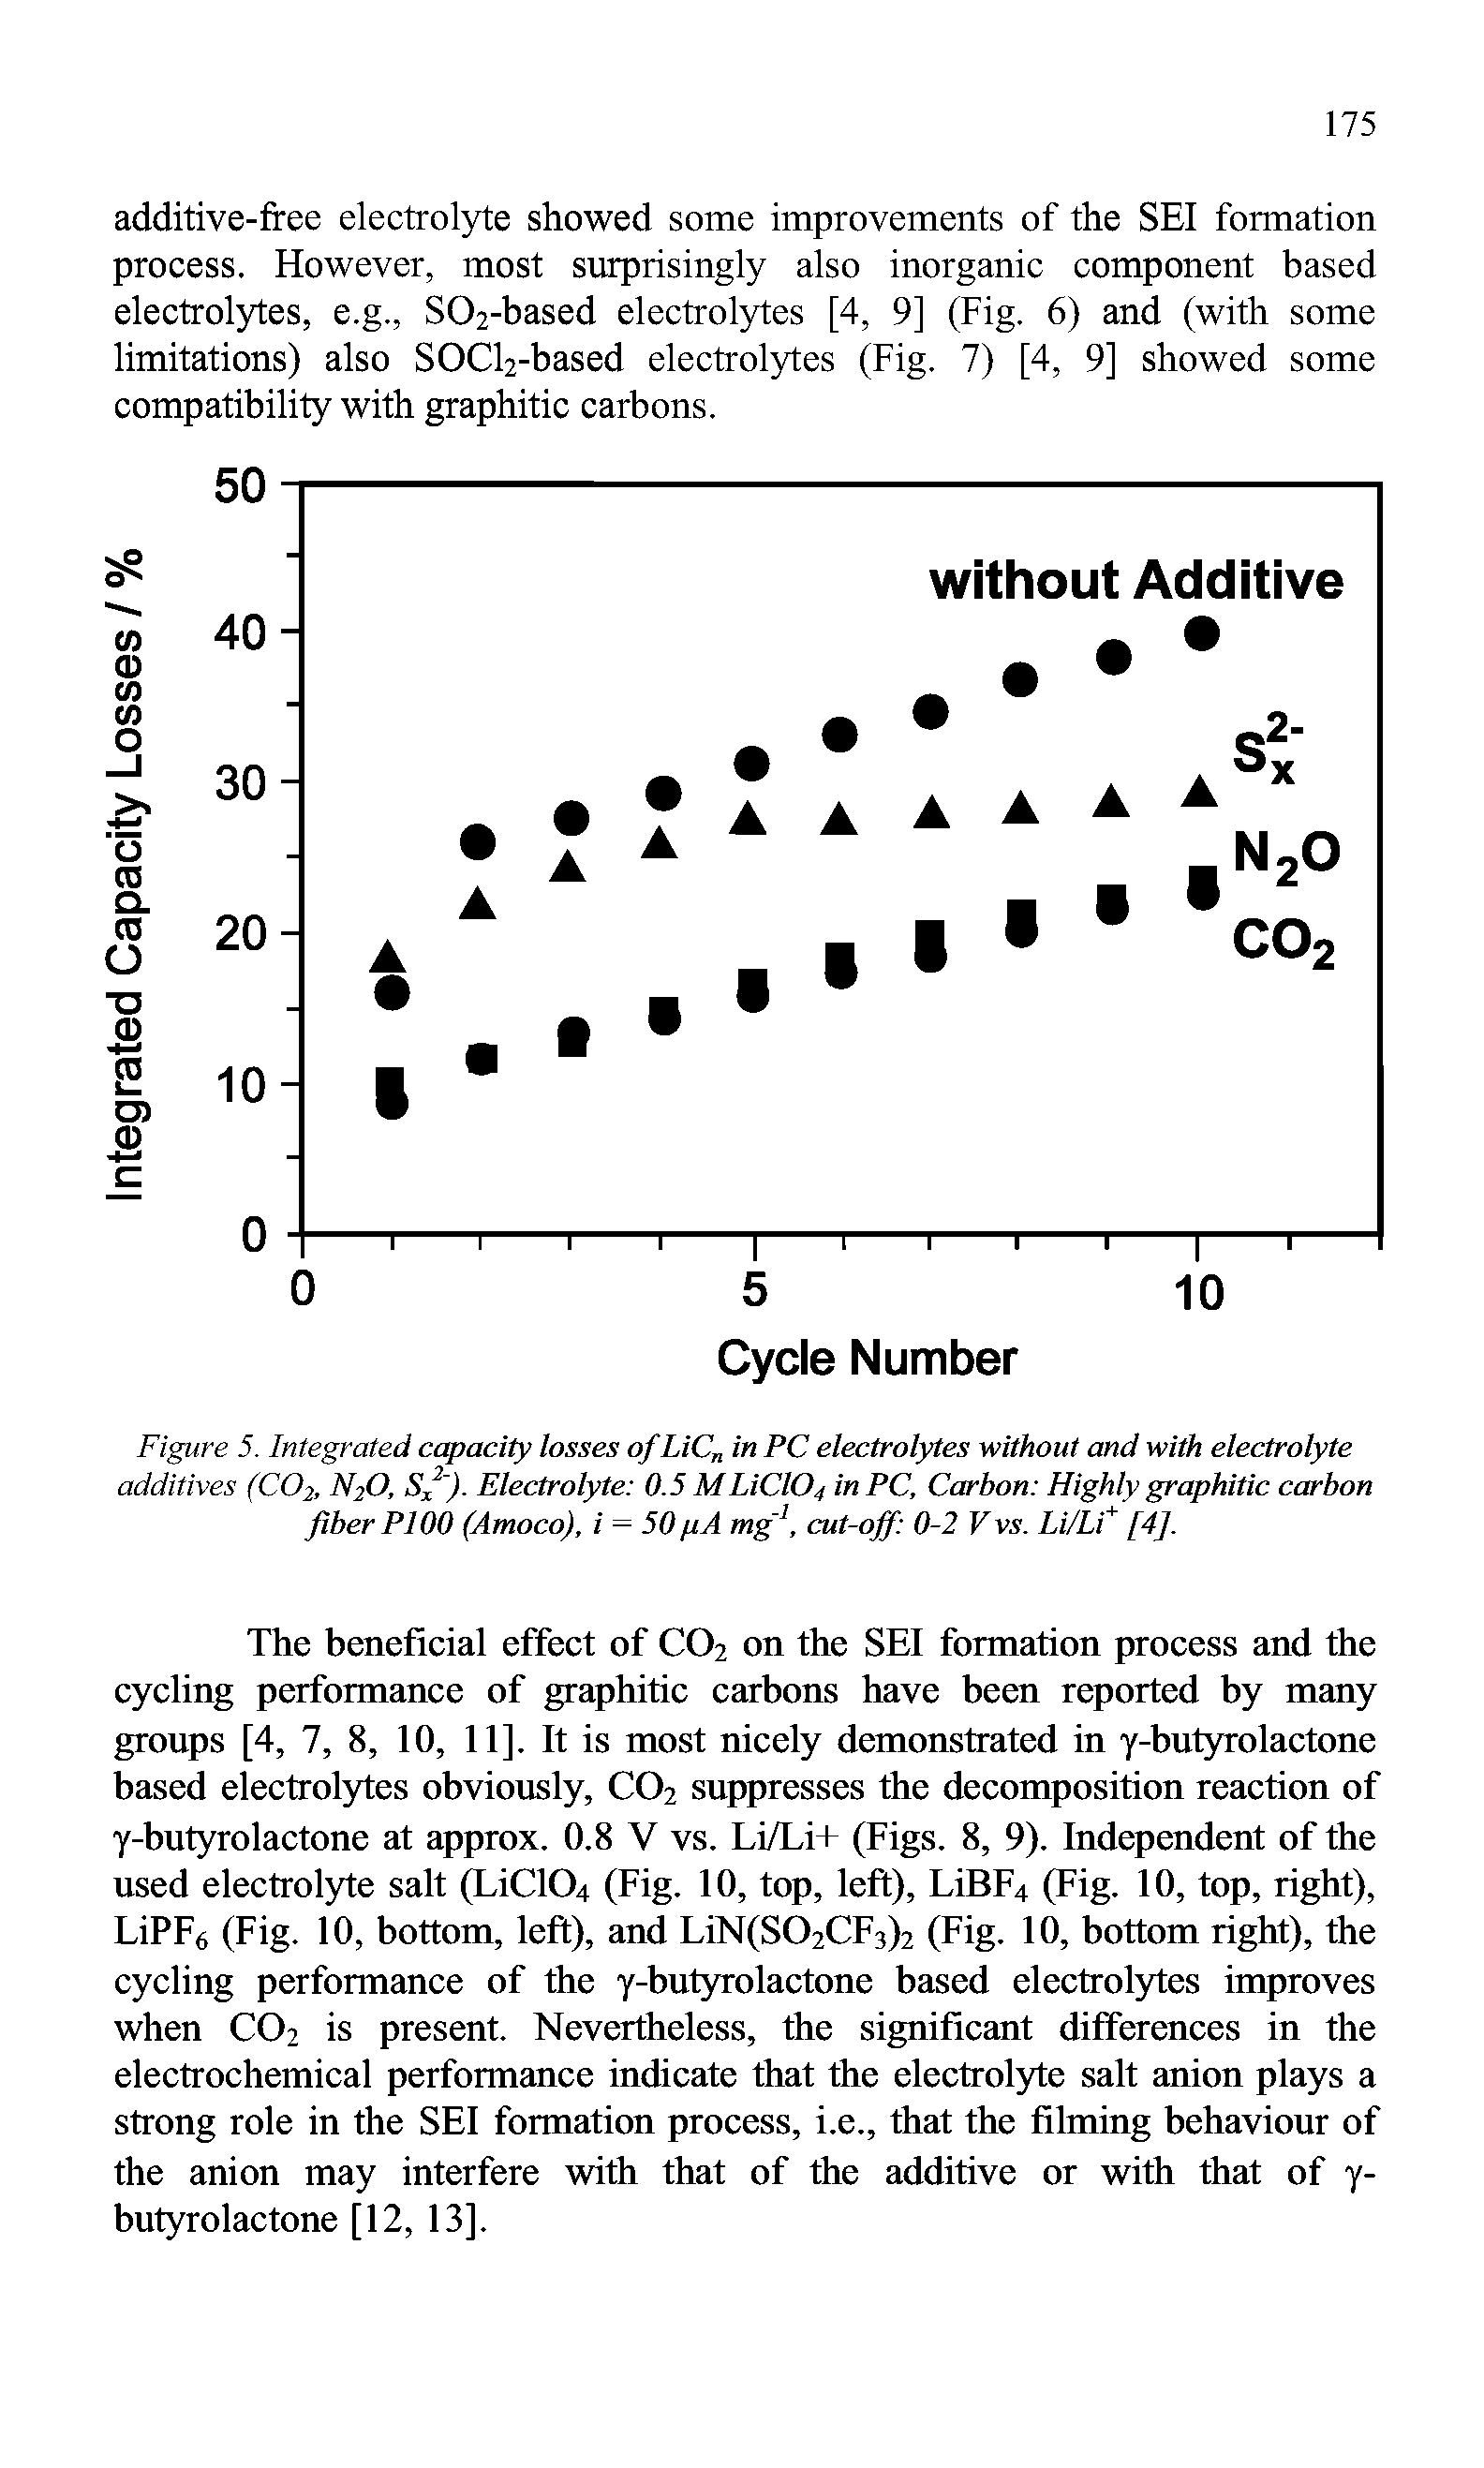 Figure 5. Integrated capacity losses of LiCn in PC electrolytes without and with electrolyte additives (CO2, N2O, S ). Electrolyte 0.5 M UCIO4 inPC, Carbon Highly graphitic carbon fiber PI00 (Amoco), i = 50 pA mg1, cut-off 0-2 V vs. Li/Li+ [4],...